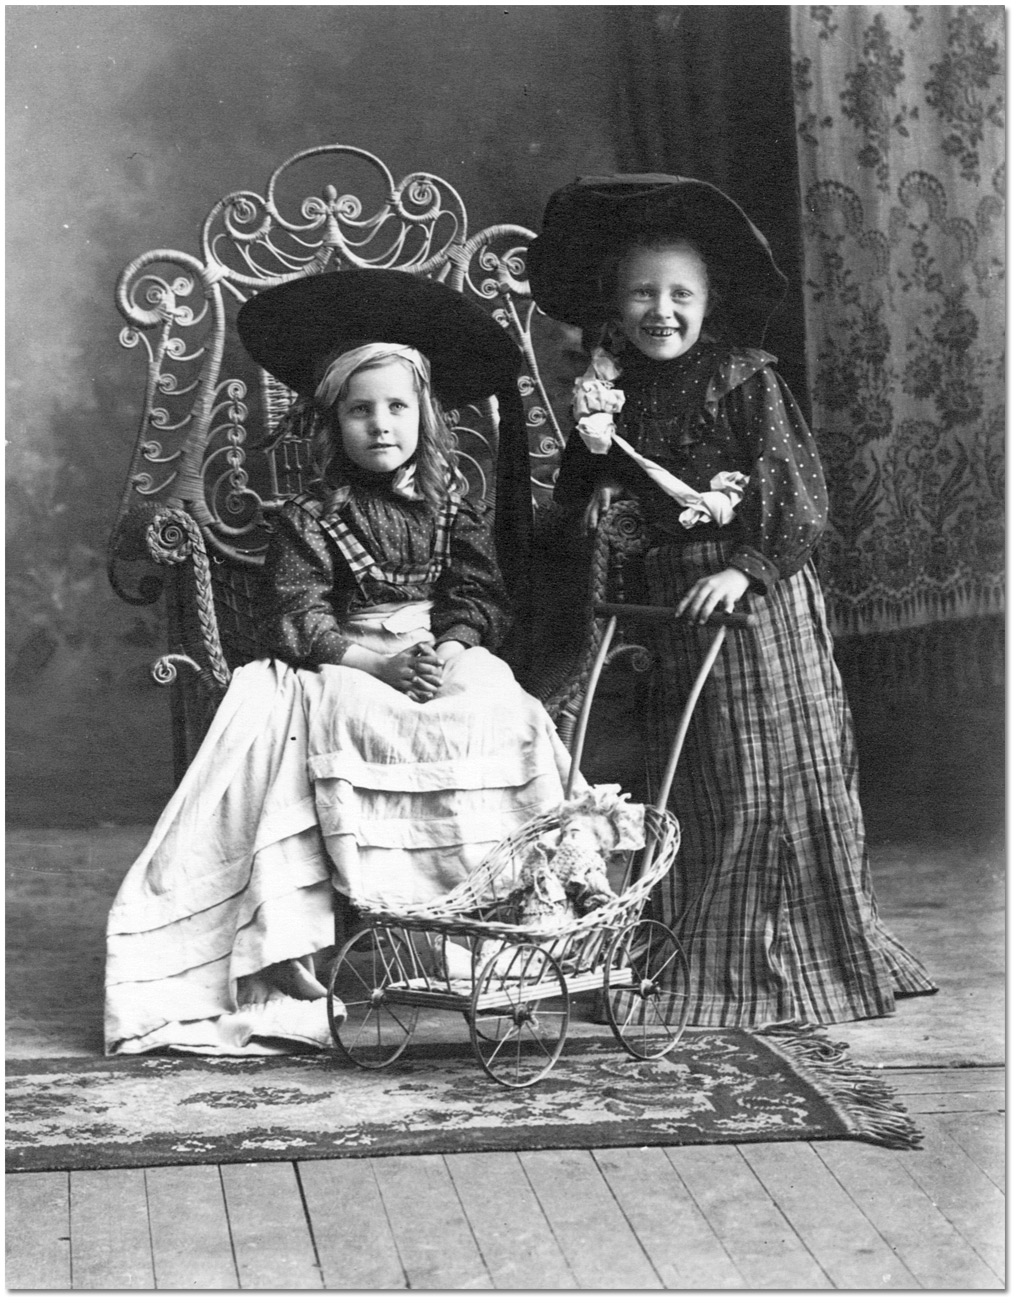 Photo: Two girls with doll carriage, [190-?]